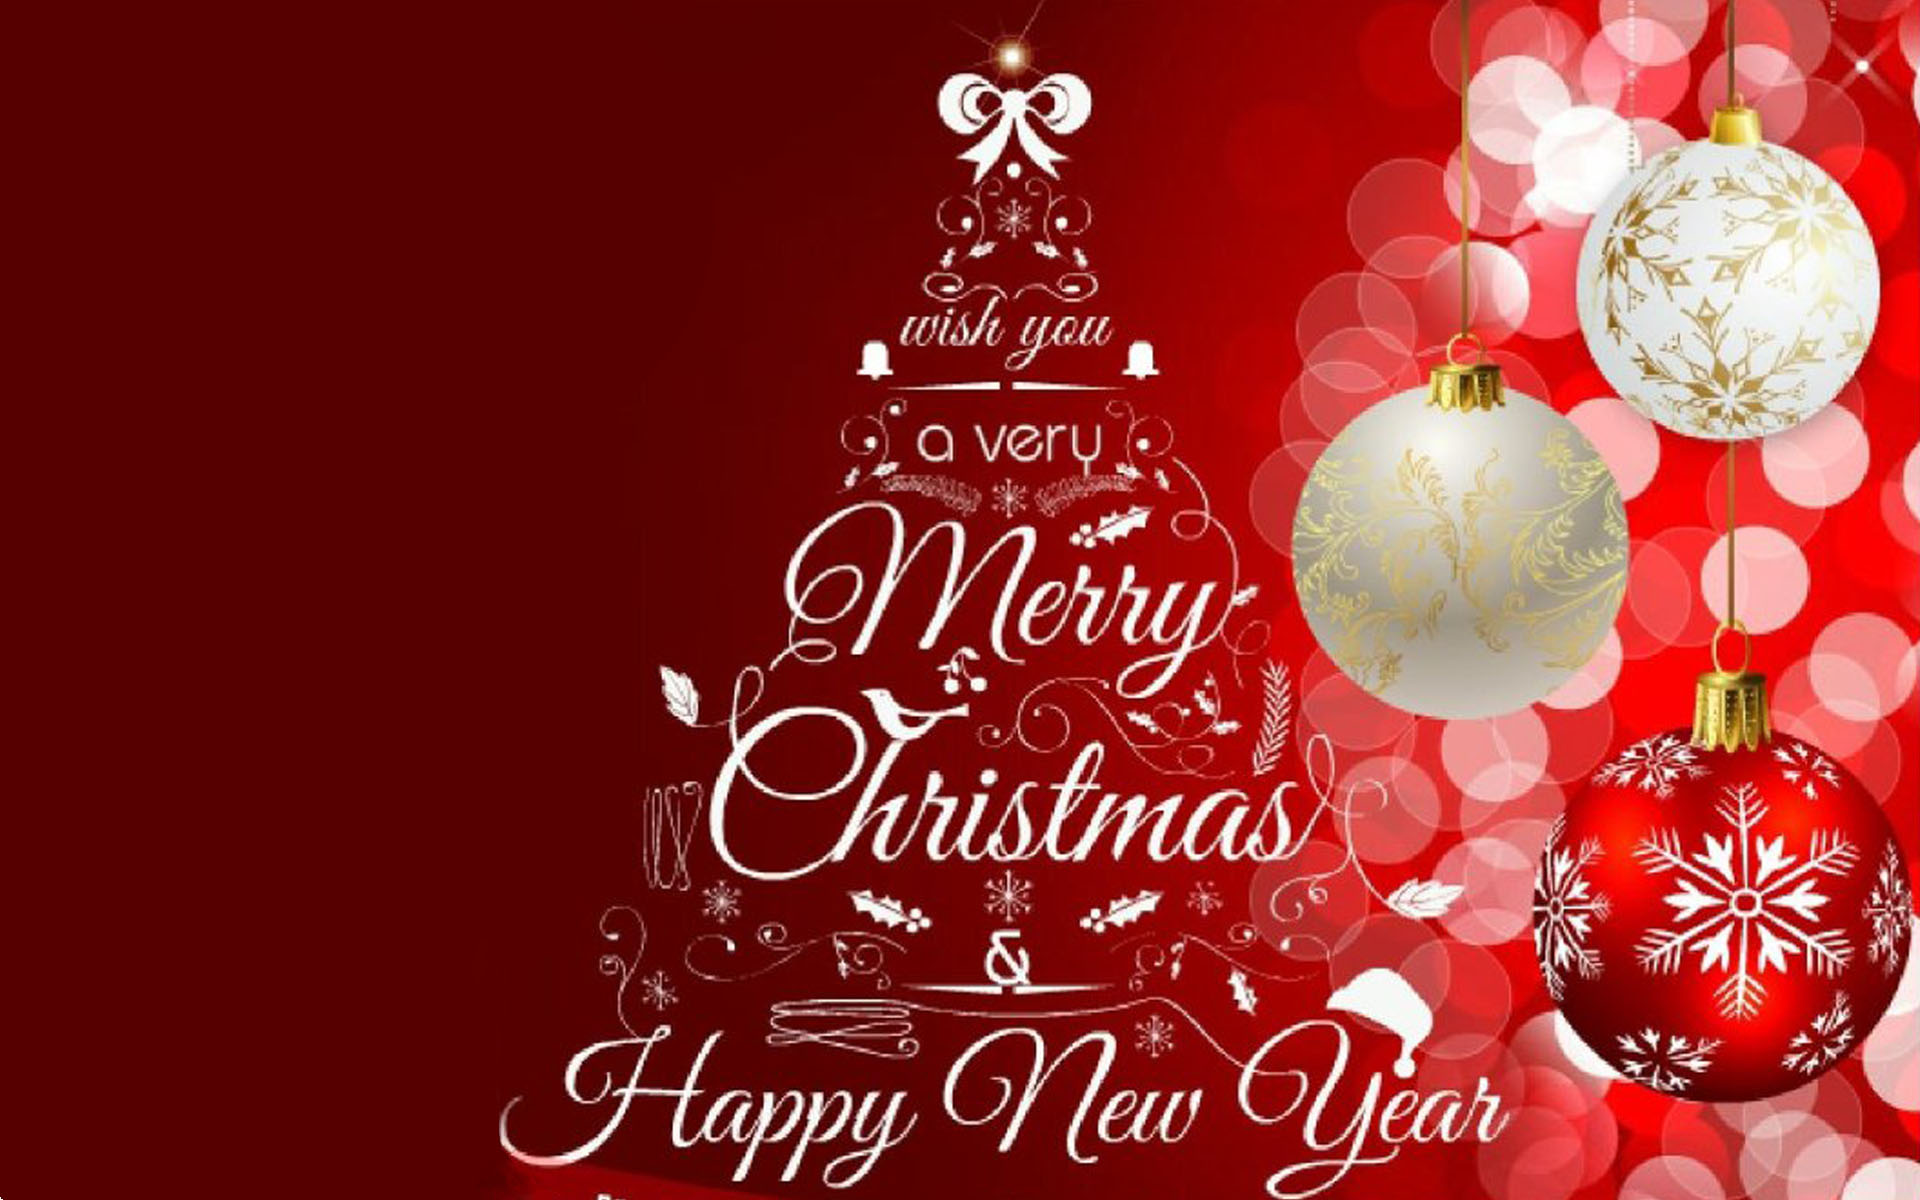 Greeting Card Merry Christmas And Happy New Year Image